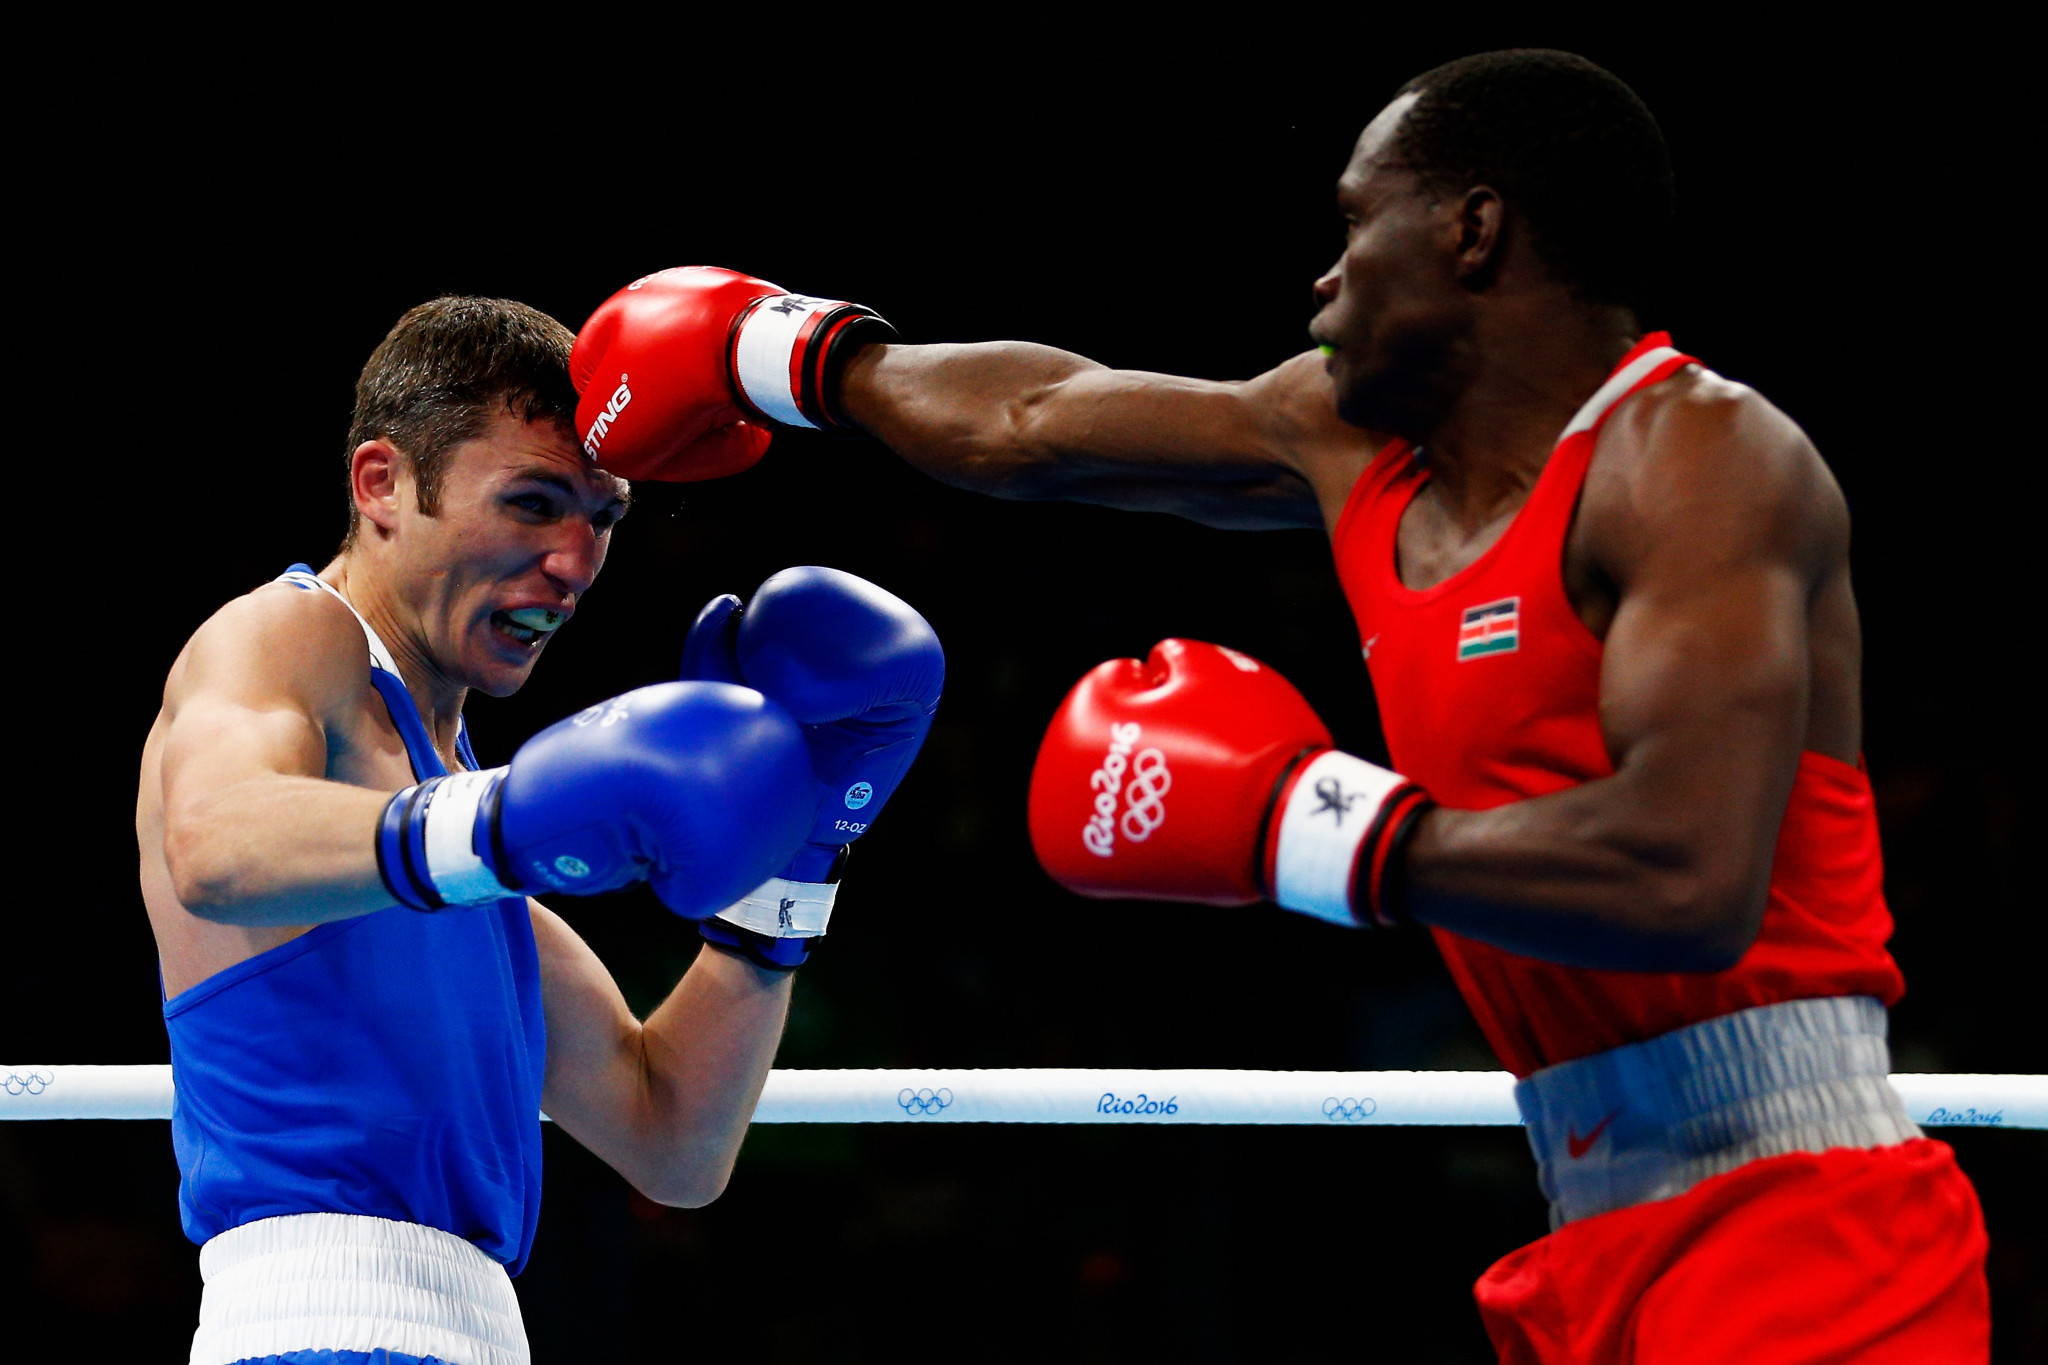 Okwiri sets up meeting with middleweight top seed at African Olympic boxing qualifier